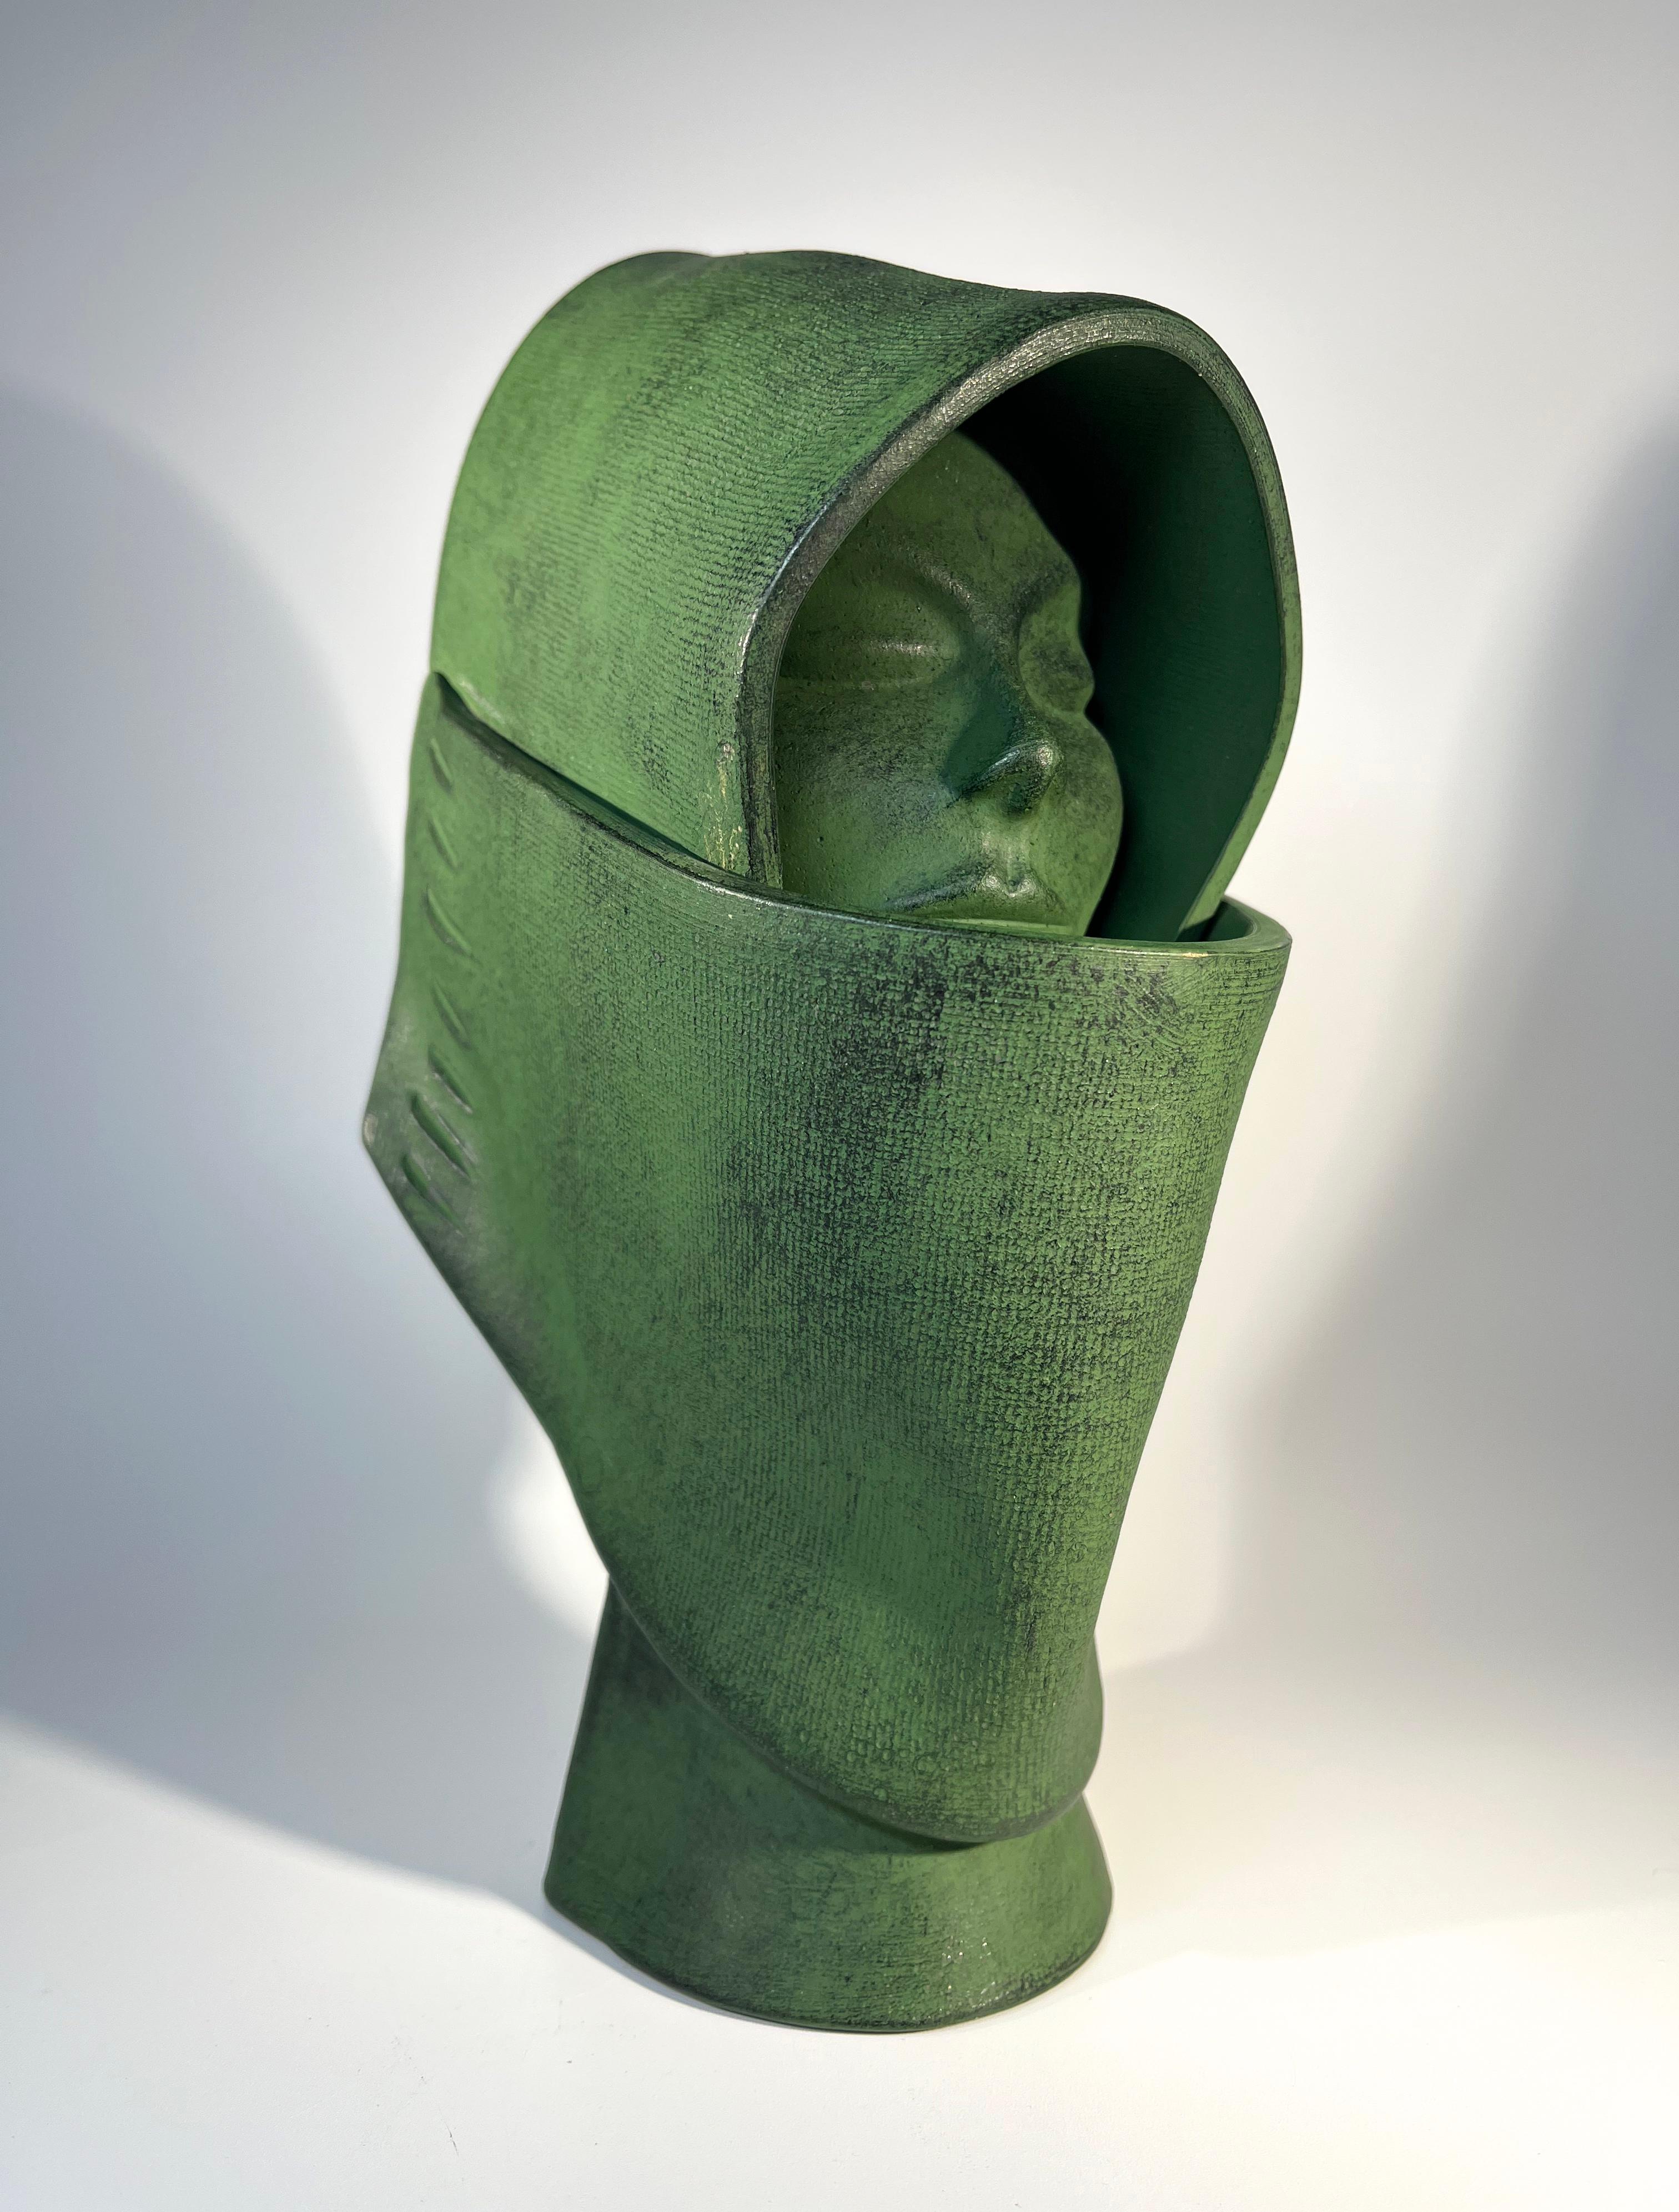 Ceramic Singularly Intriguing Clay Bust Of A Cloaked Woman For Sale